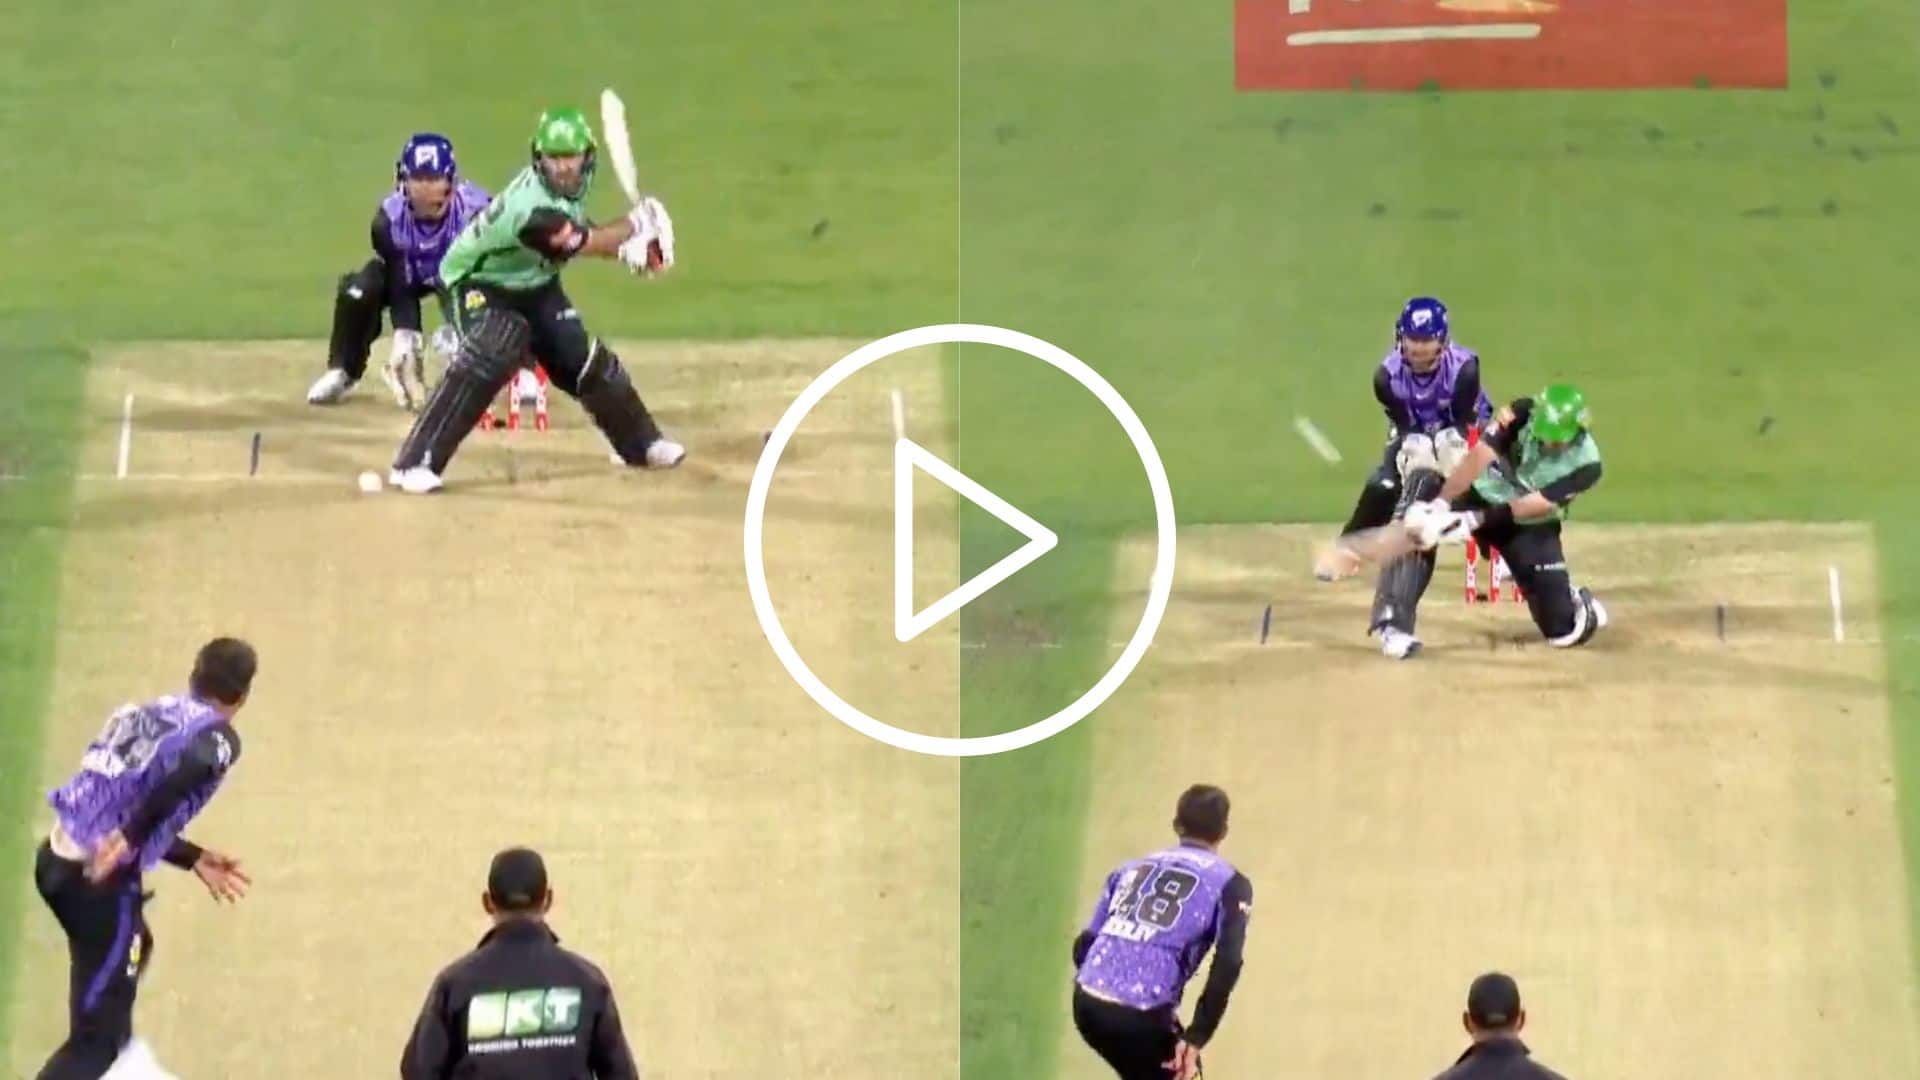 [Watch] RCB's Glenn Maxwell Exhibits Supreme Form Before IPL With Iconic Switch-Hit